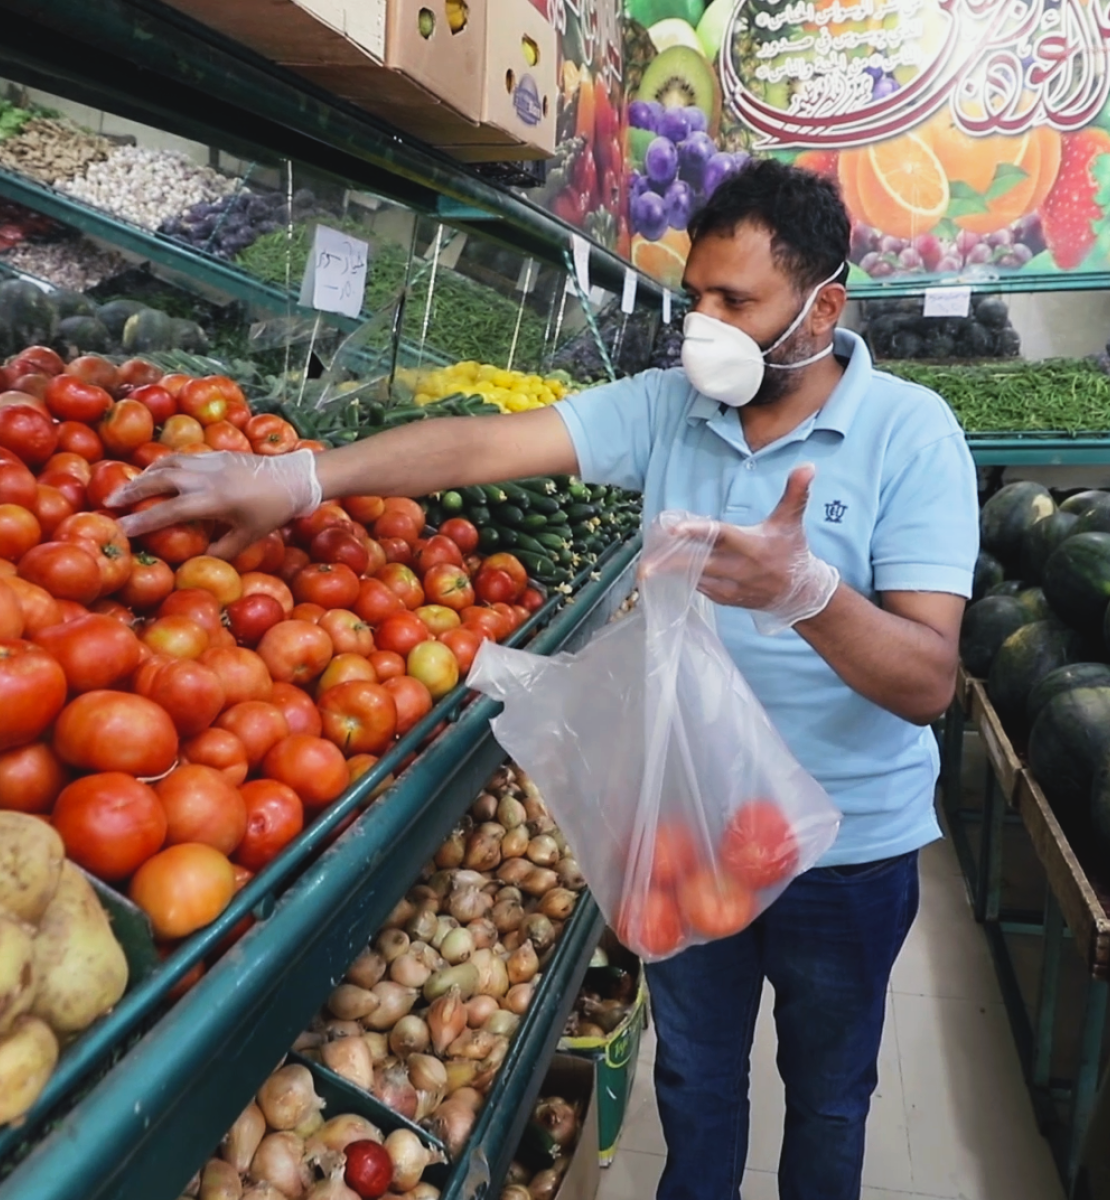 Abdou, a Yemeni refugee in Amman, shops in one of the grocery after the reopening of small shops.